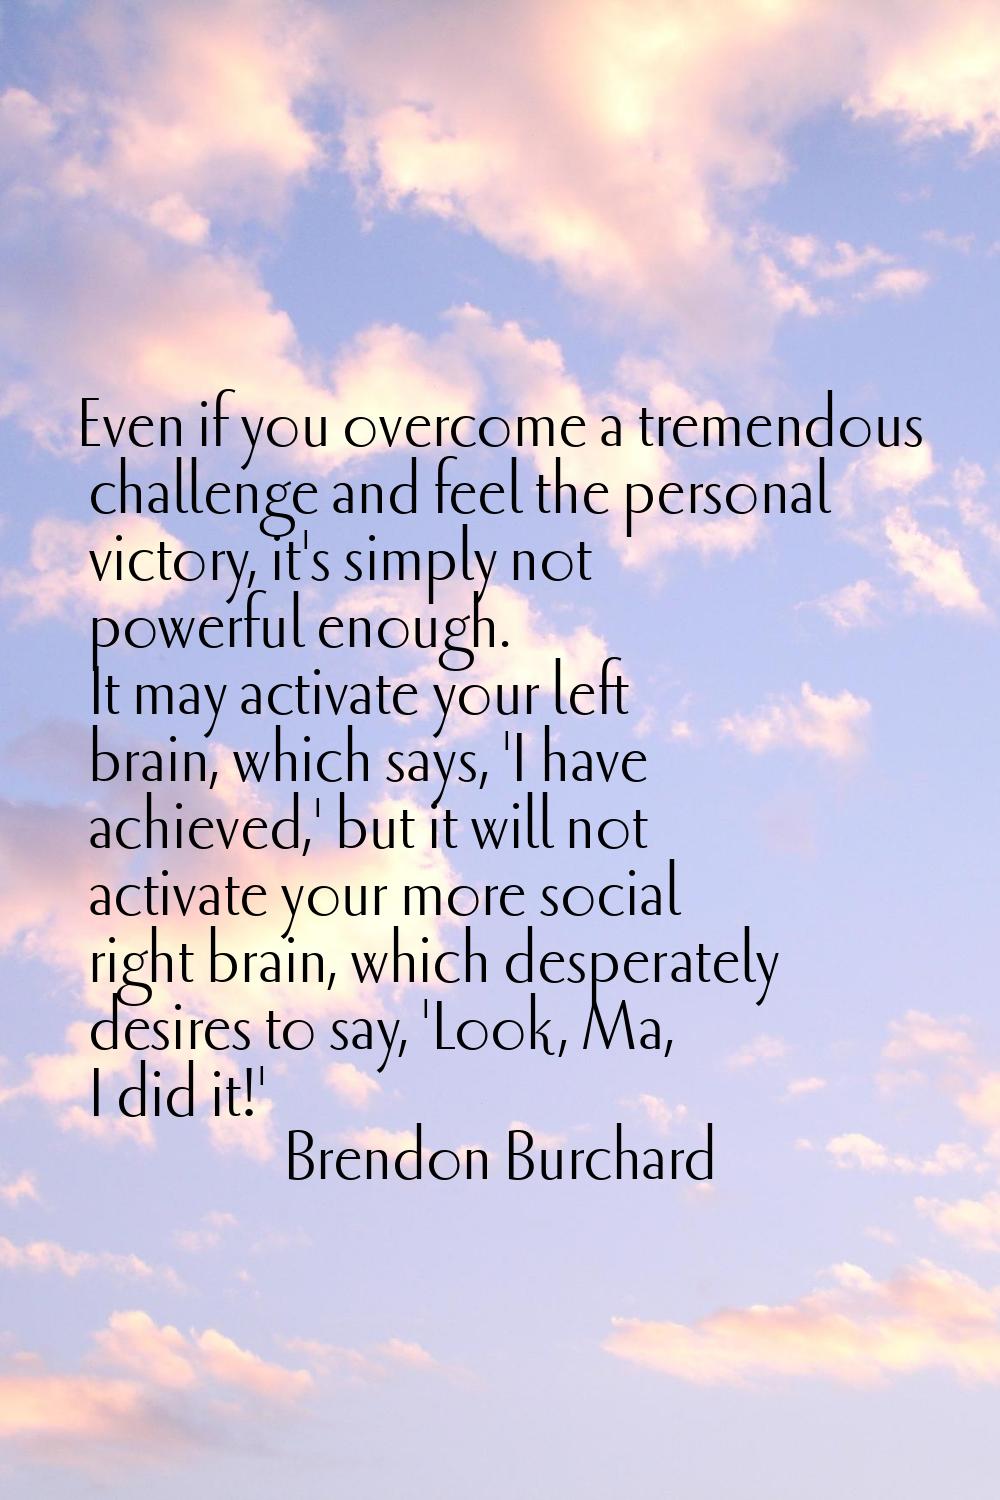 Even if you overcome a tremendous challenge and feel the personal victory, it's simply not powerful